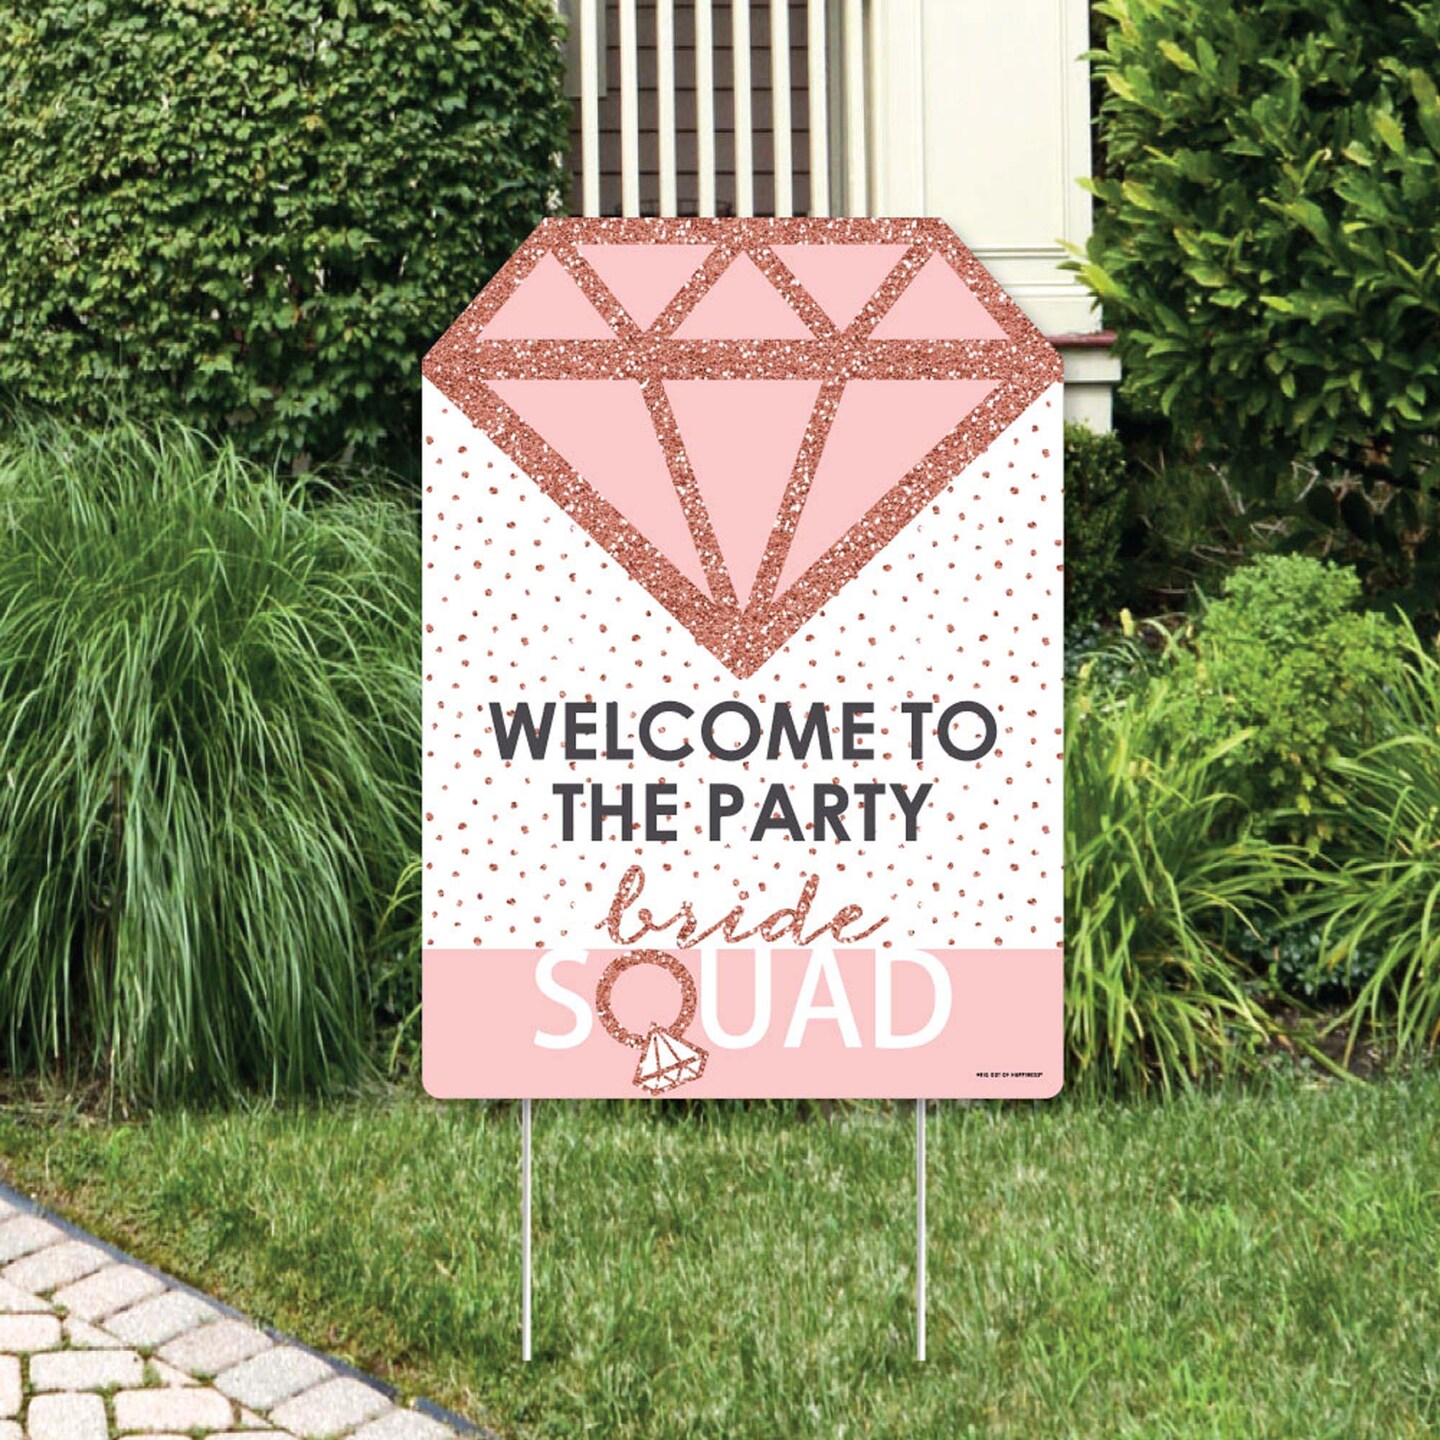 Big Dot of Happiness Bride Squad - Party Decorations - Rose Gold Bridal Shower or Bachelorette Party Welcome Yard Sign